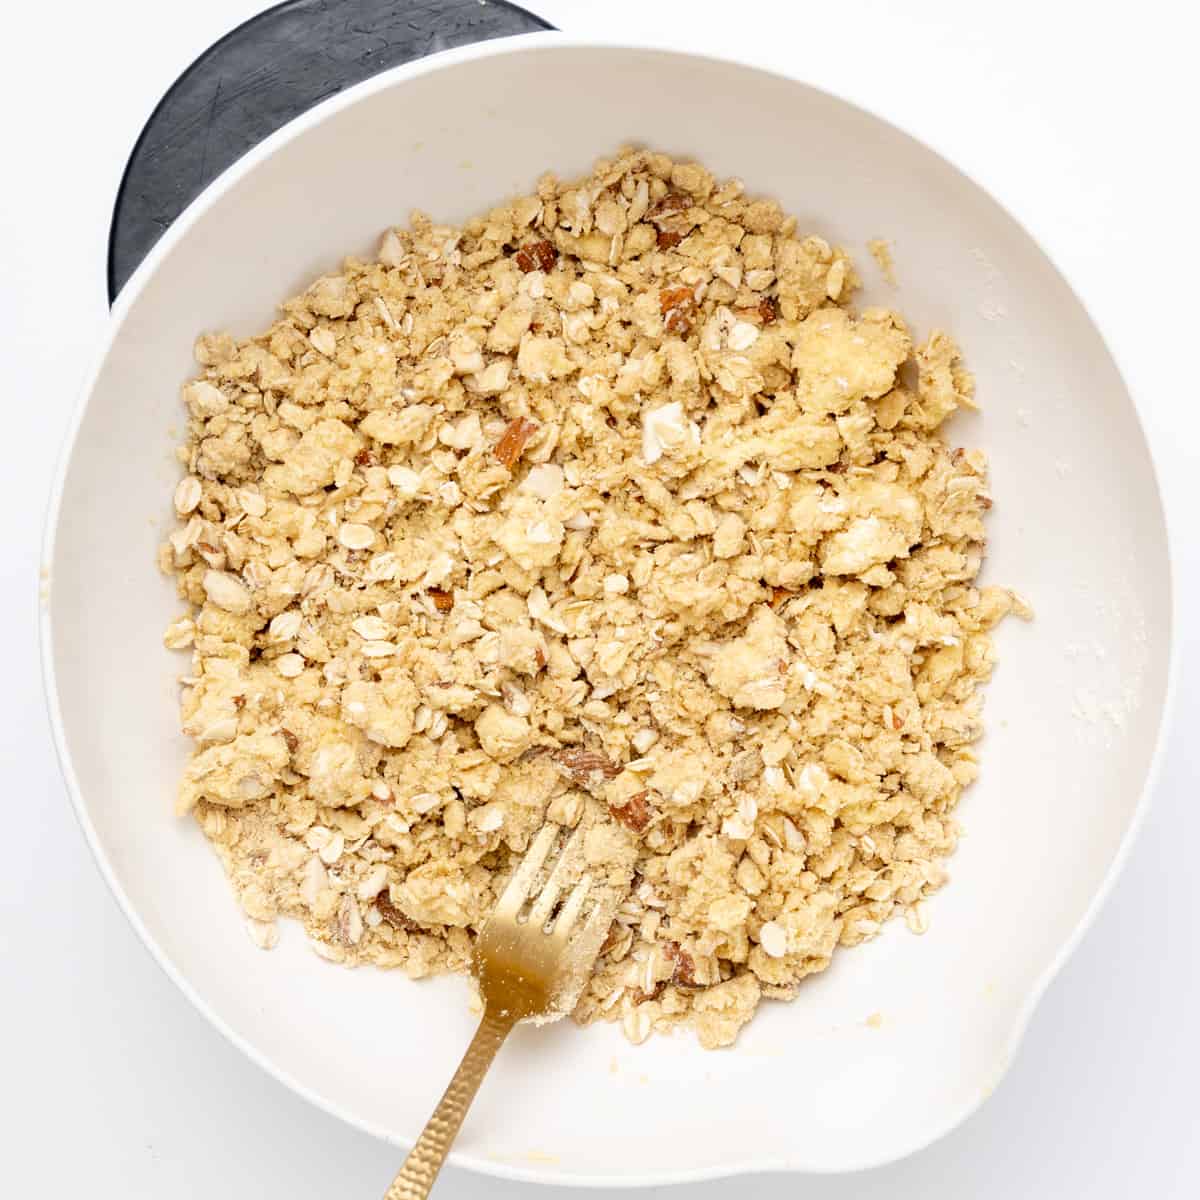 The crisp topping still is mixed together in a bowl.